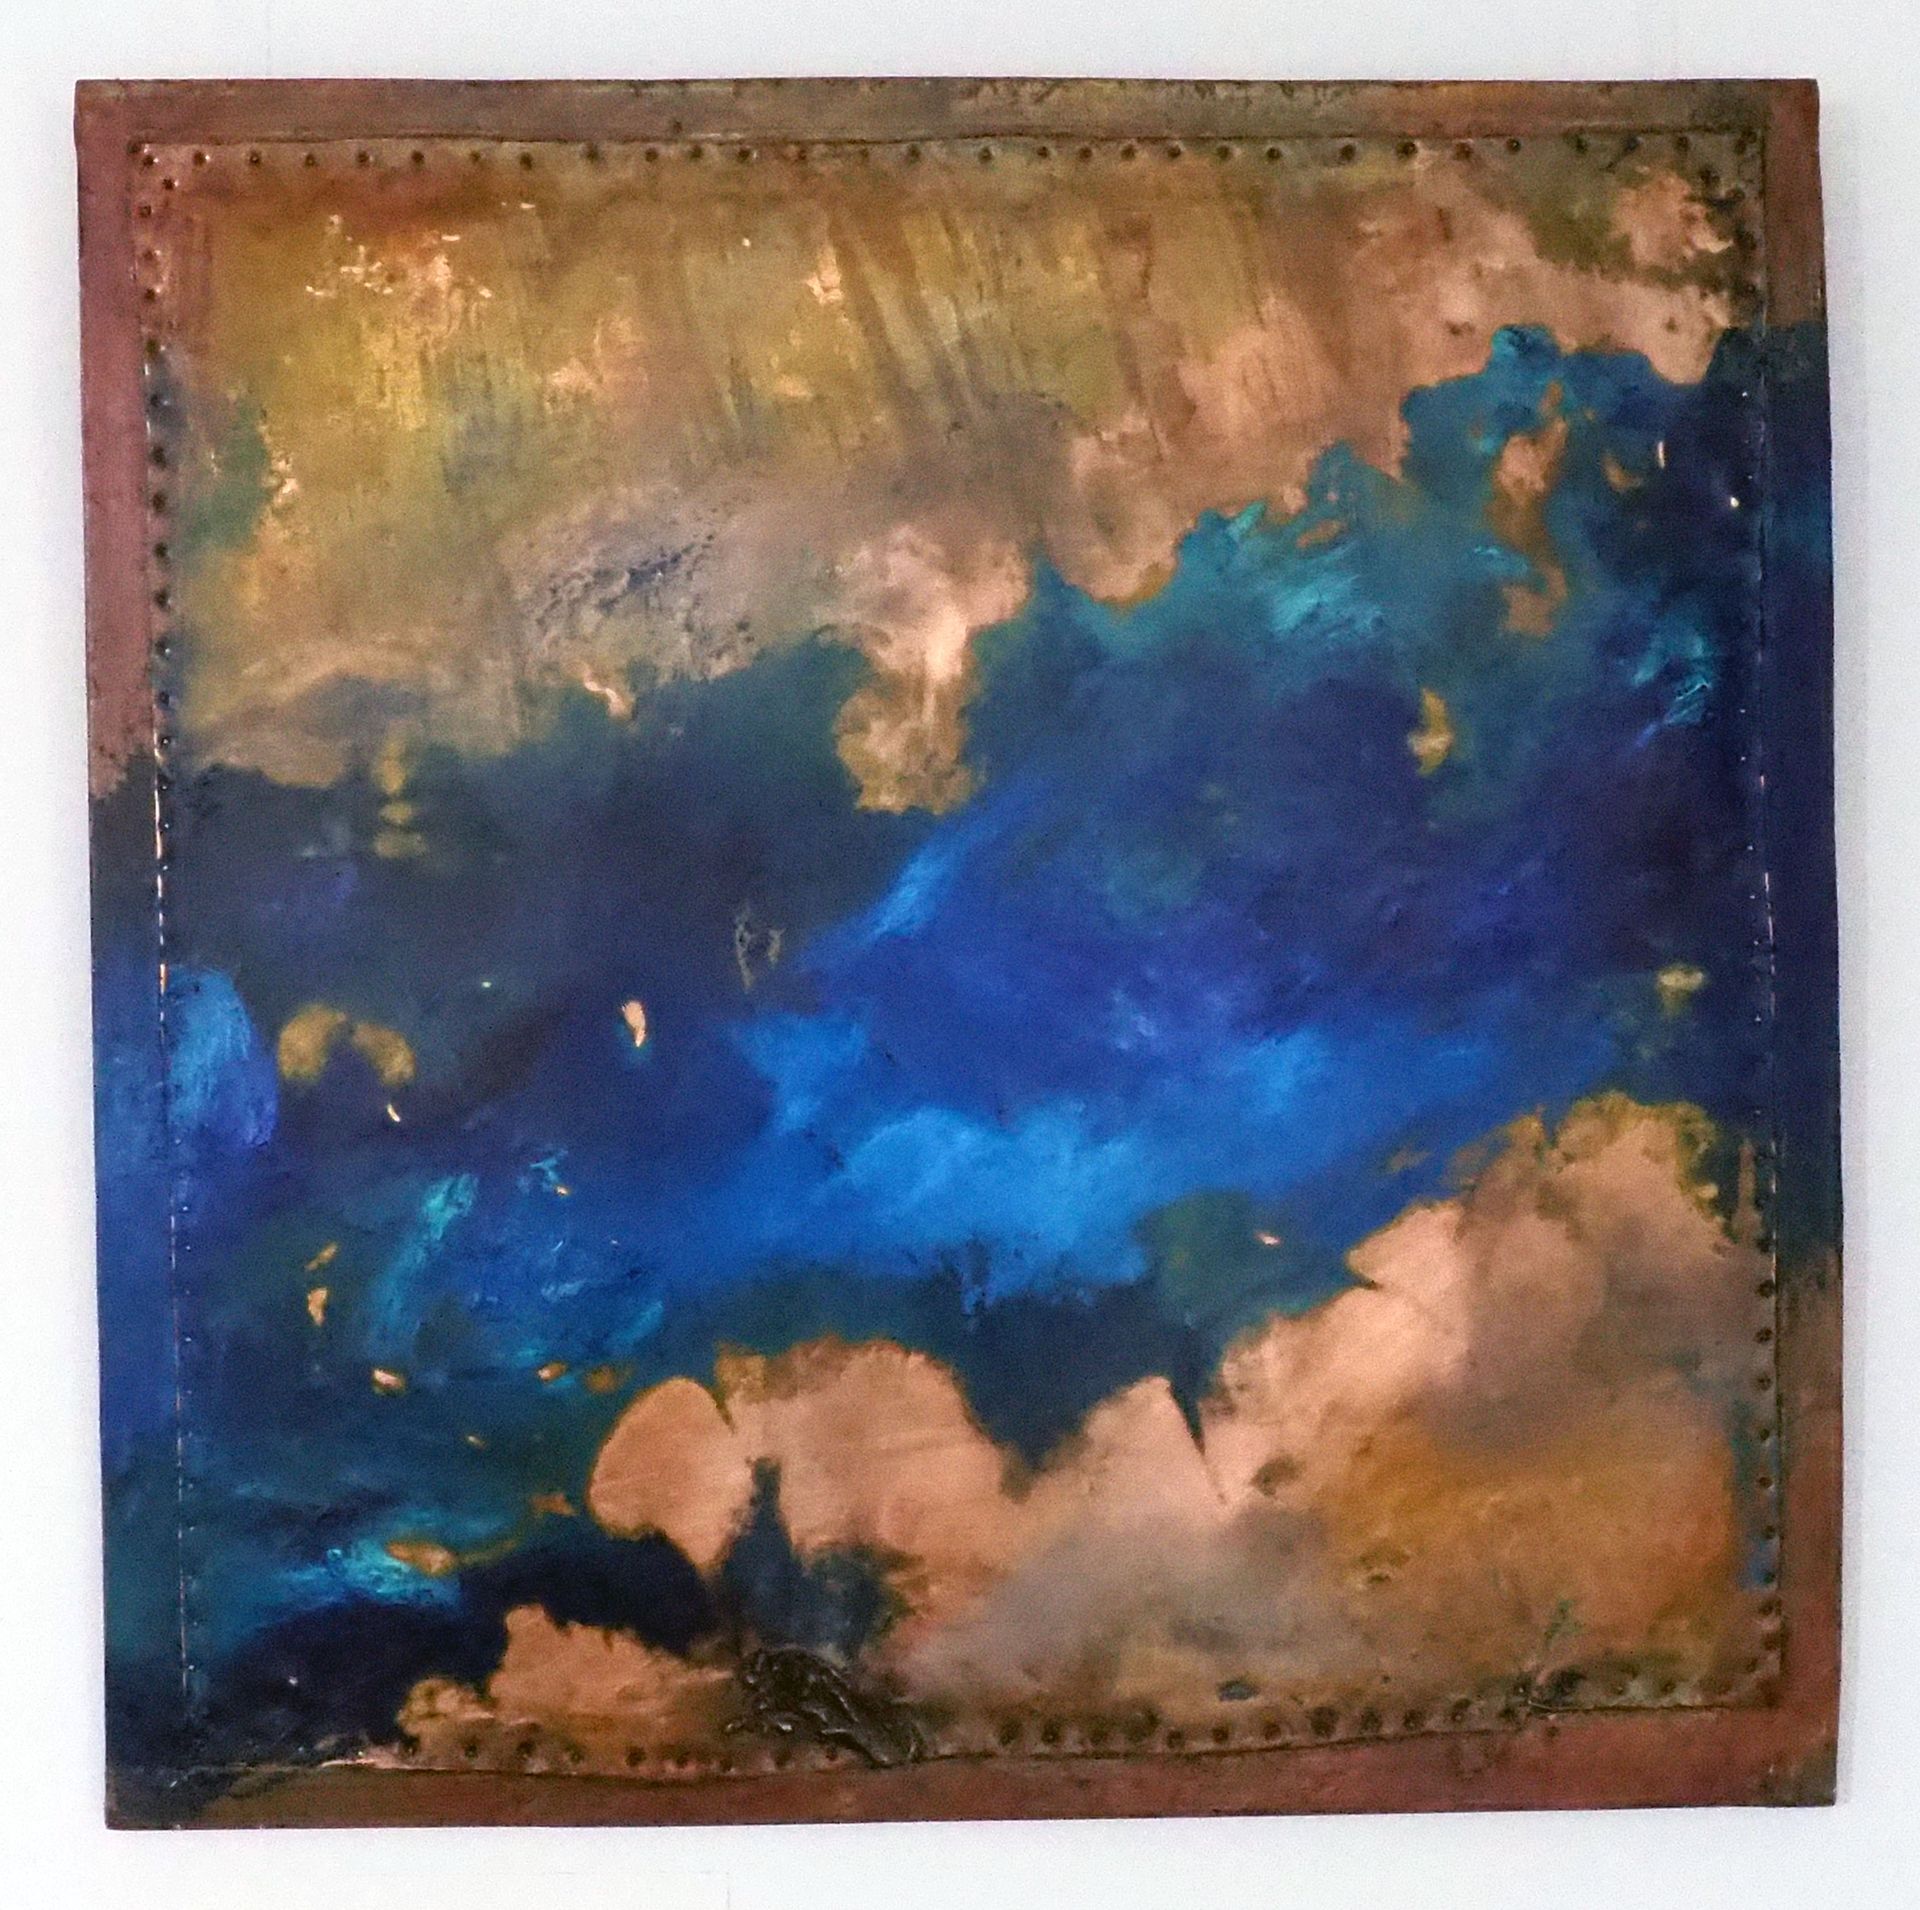 A square copper panel pinned onto a copper coloured board. The copper is tarnished in places. There is blue with a bit of aqua painted roughly diagonally over the piece. 